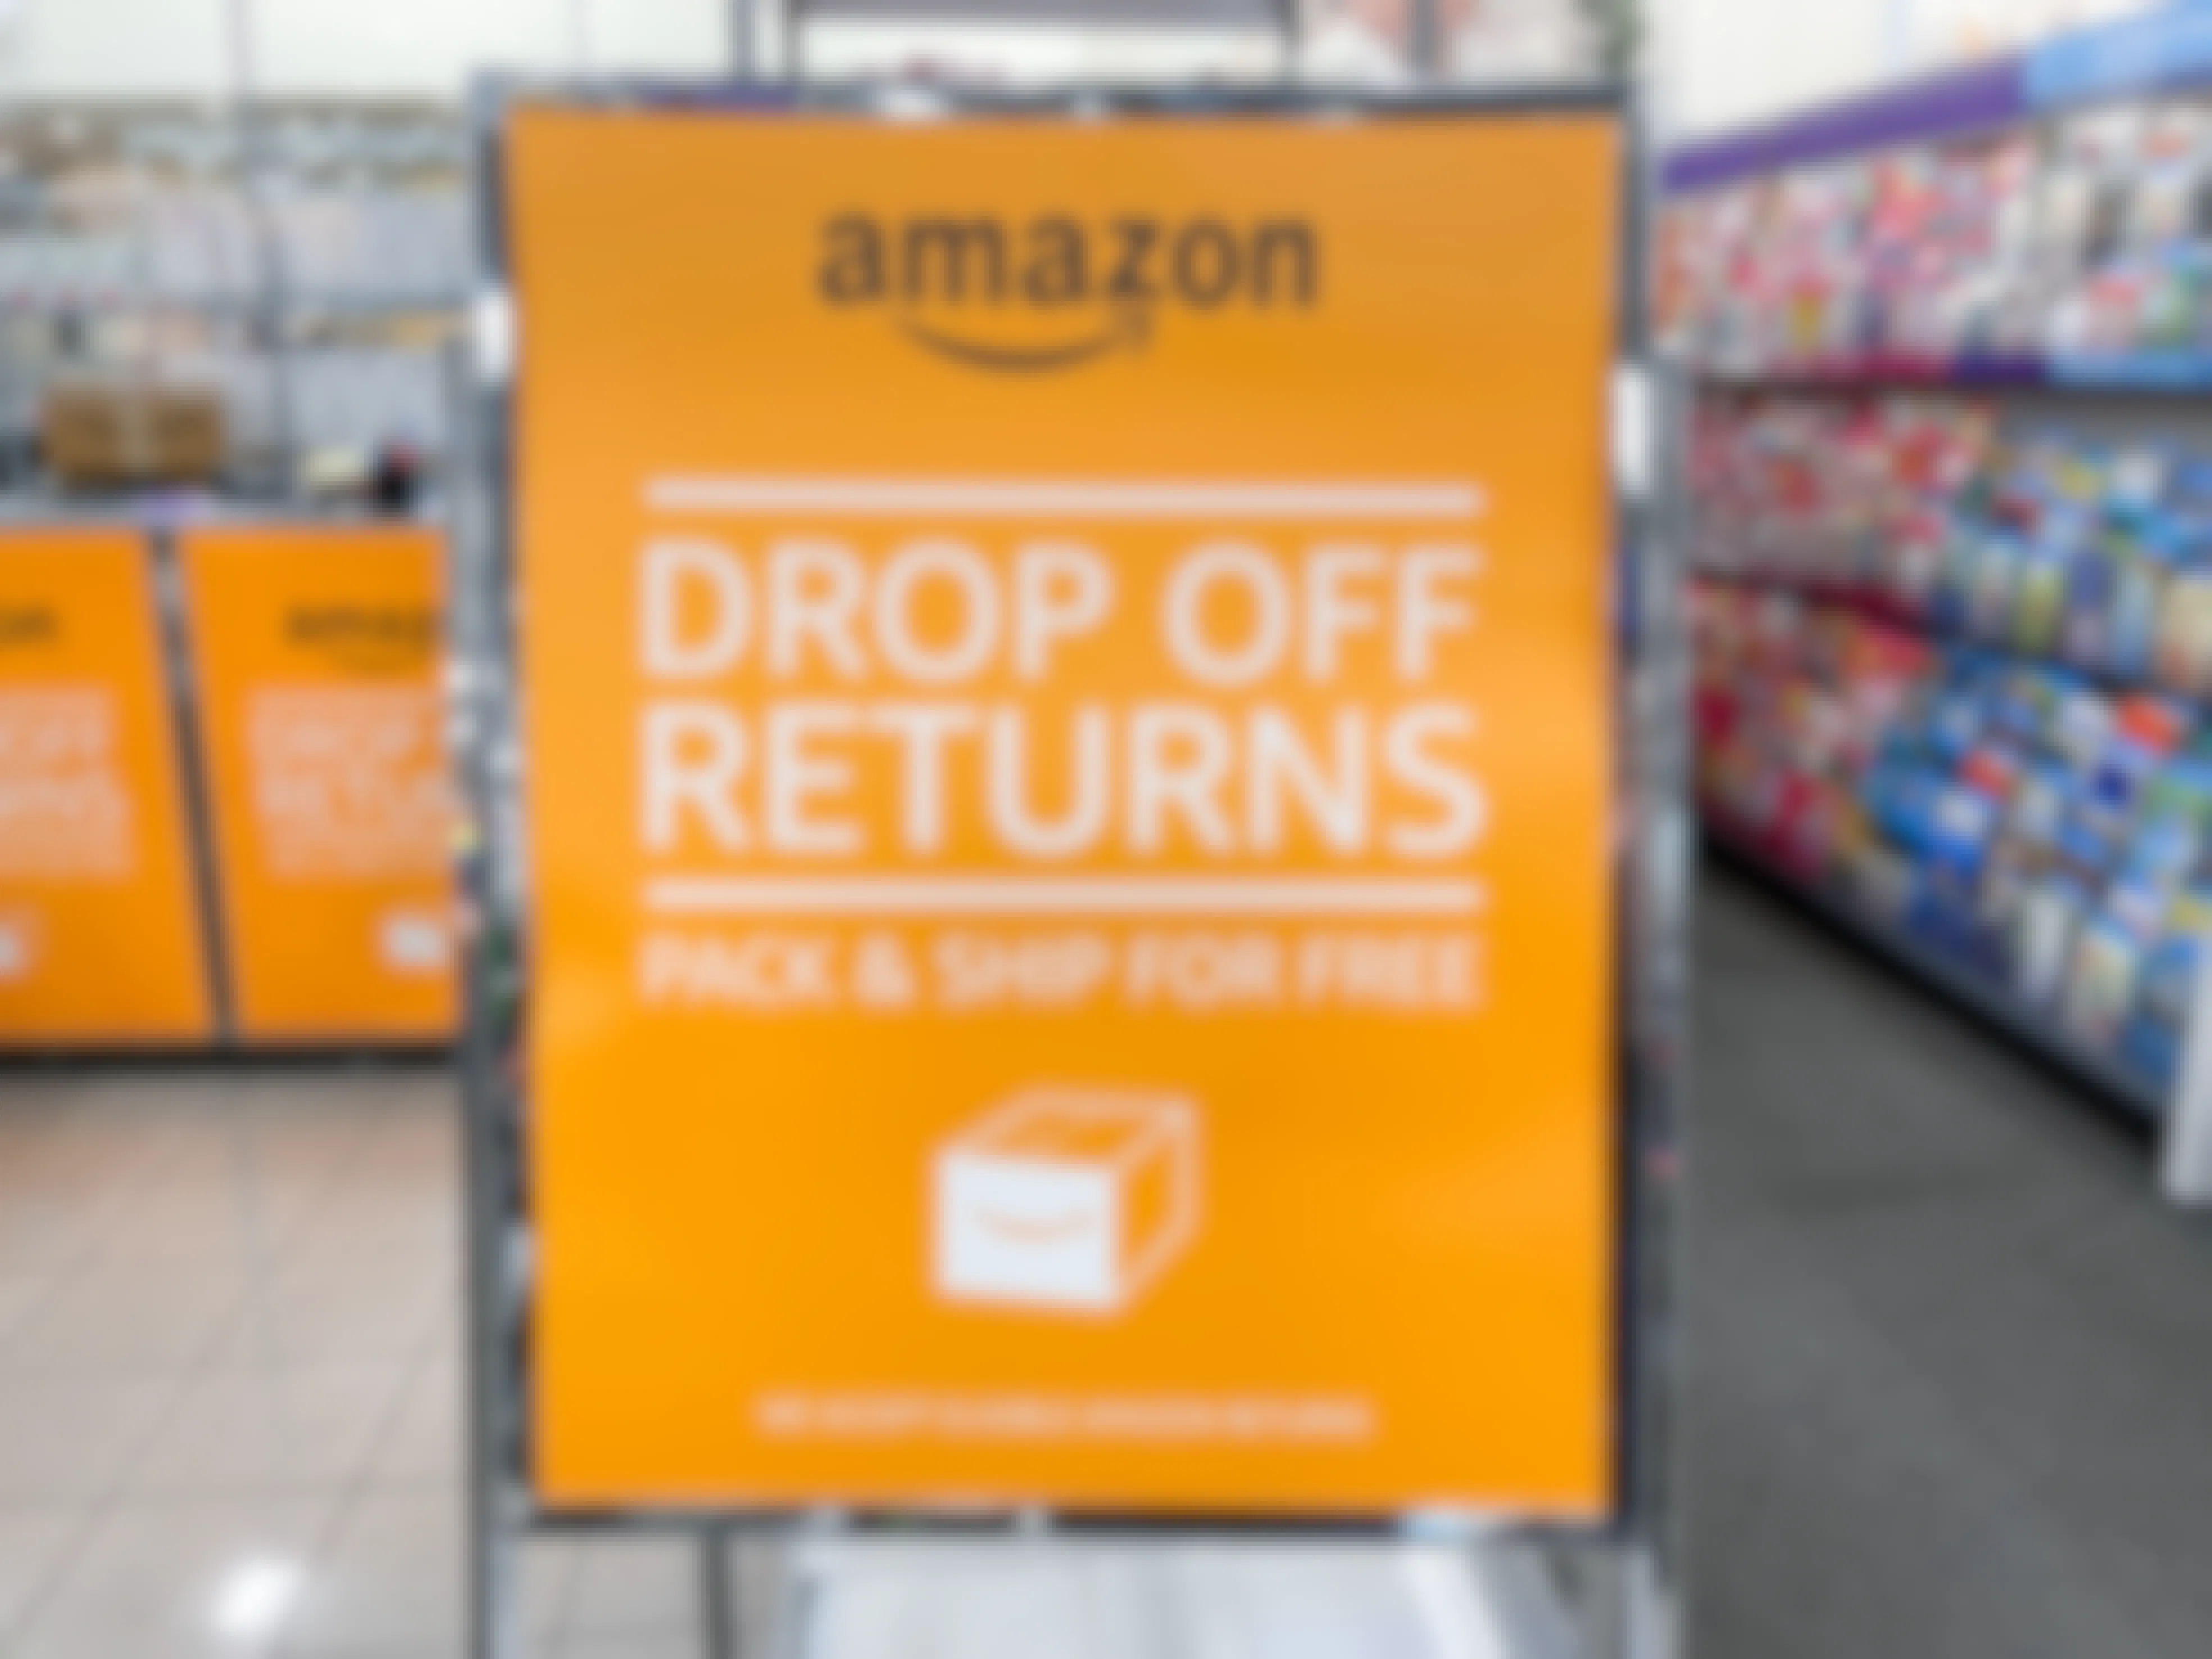 The Amazon drop off returns sign inside Kohl's.